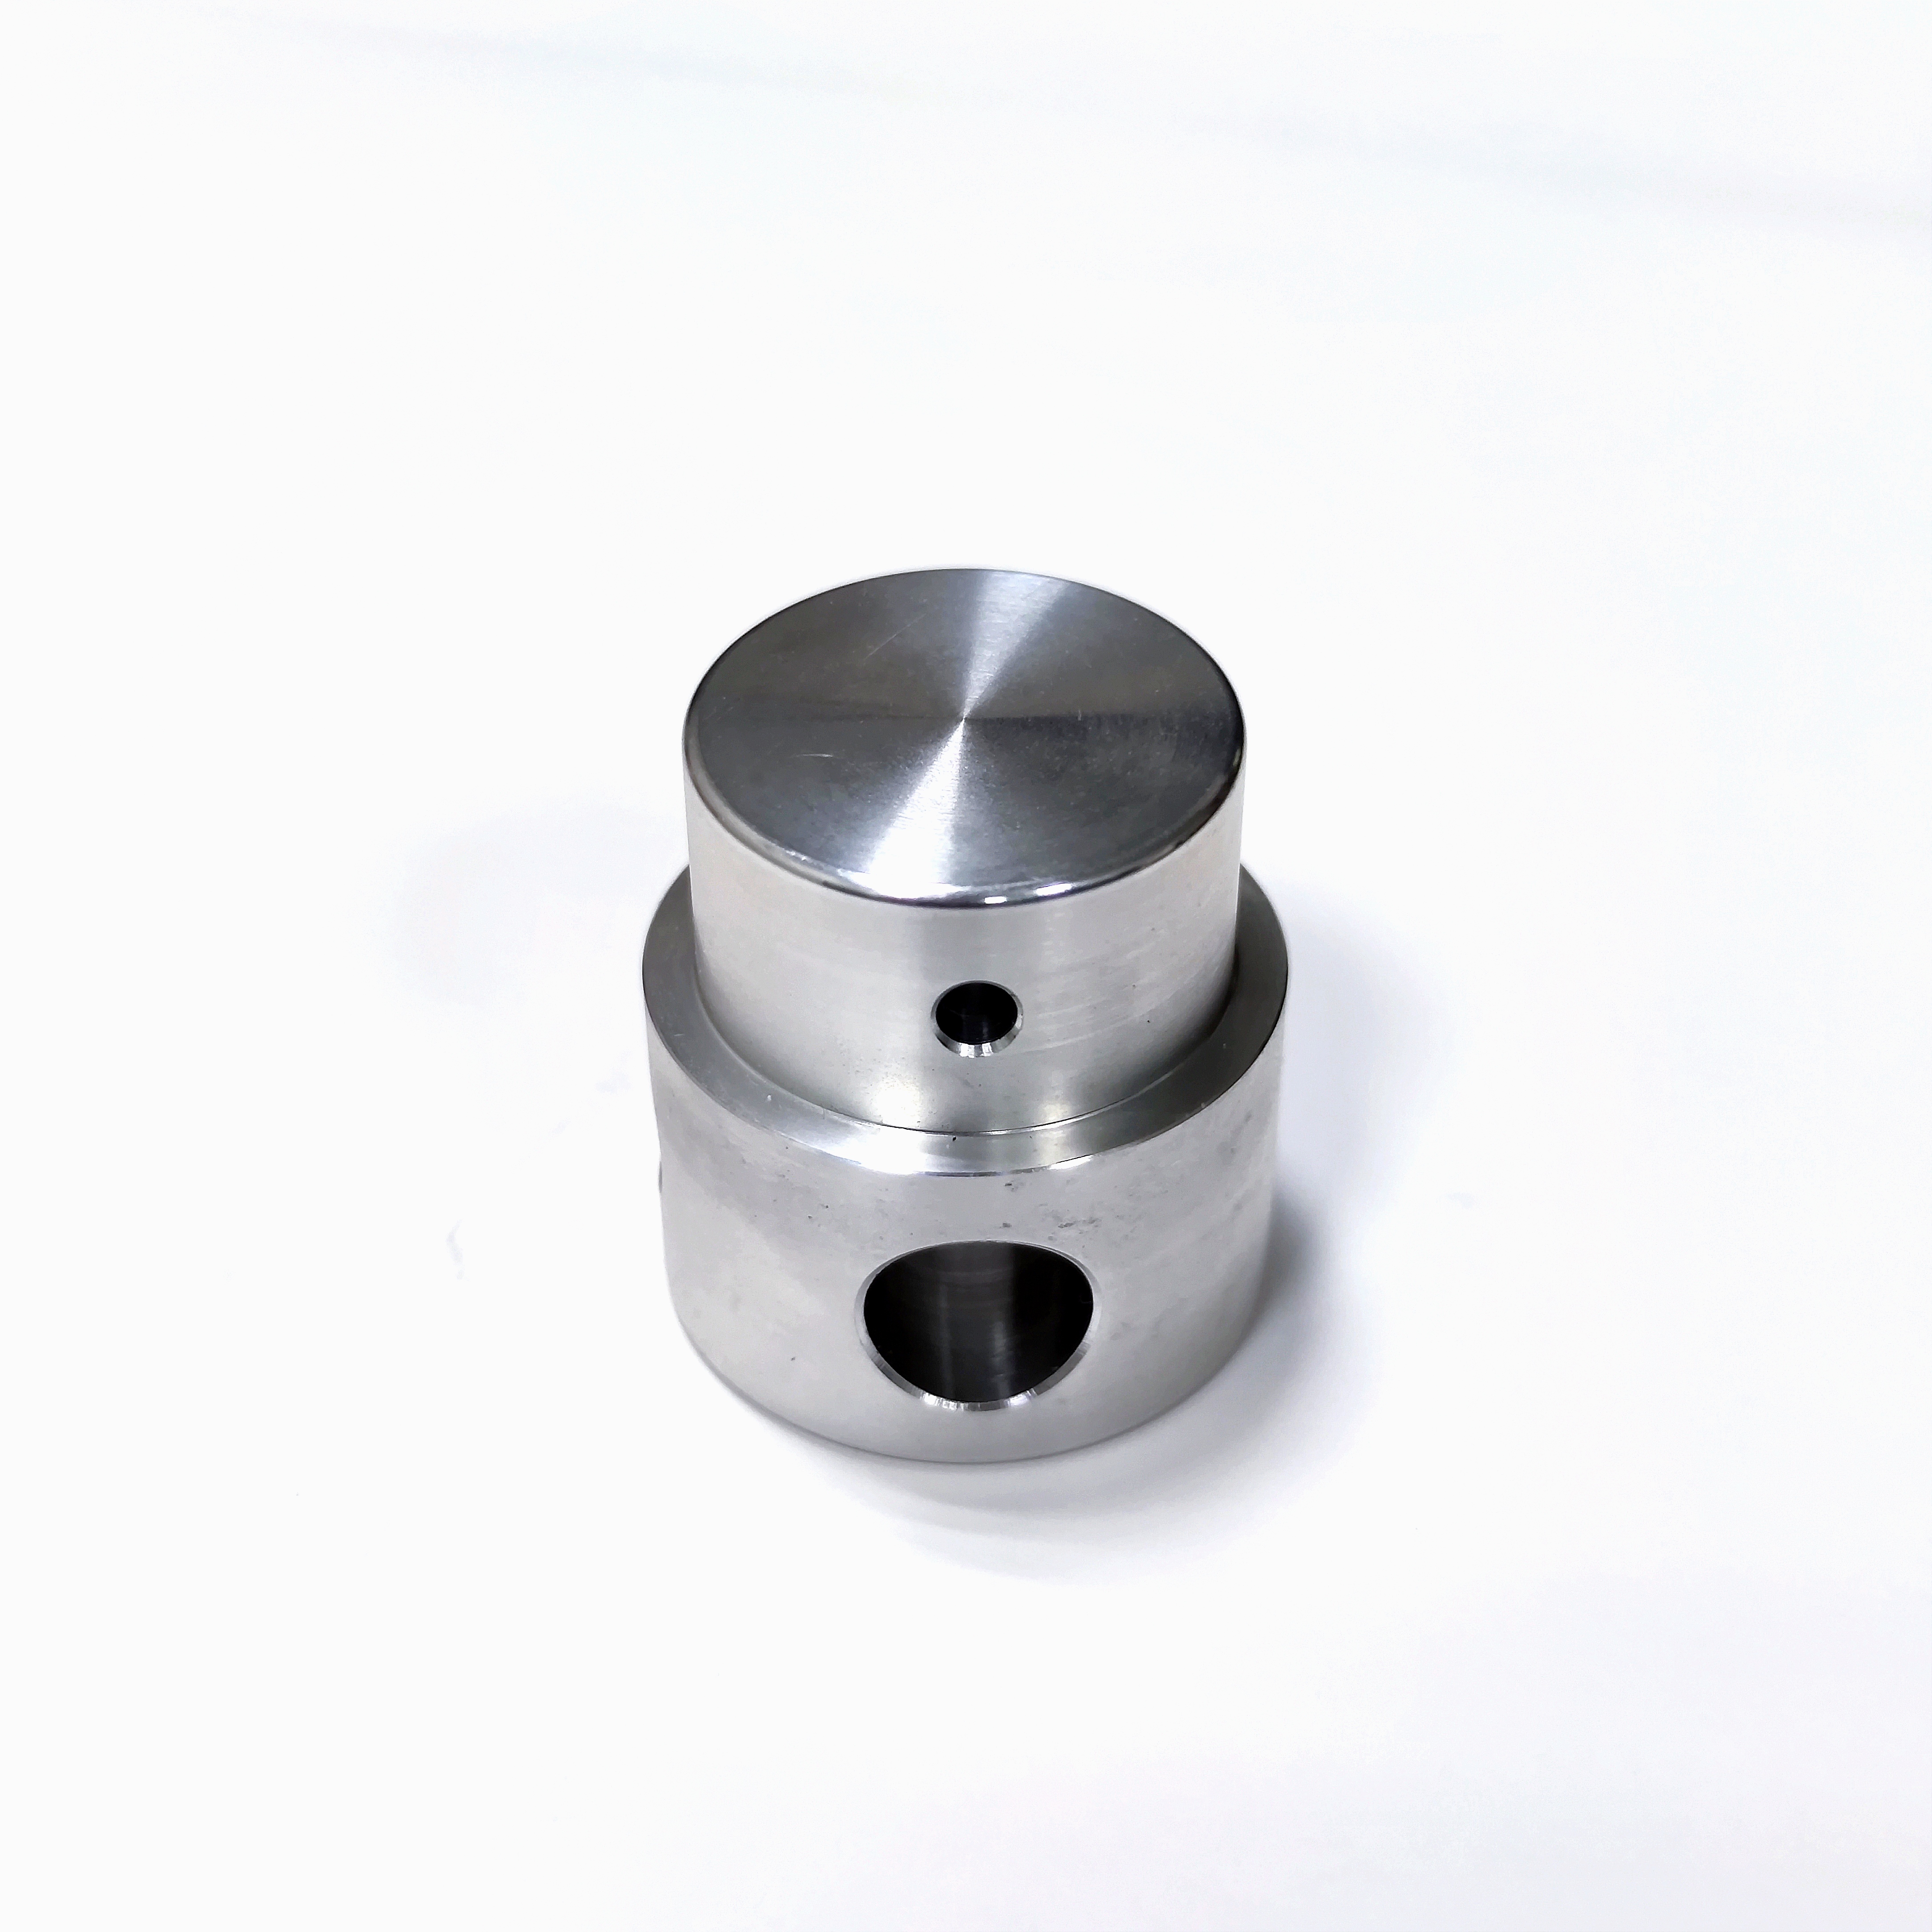  Customized Cnc Machining Parts Stainless Steel Light Parts Industrial Machenical Component